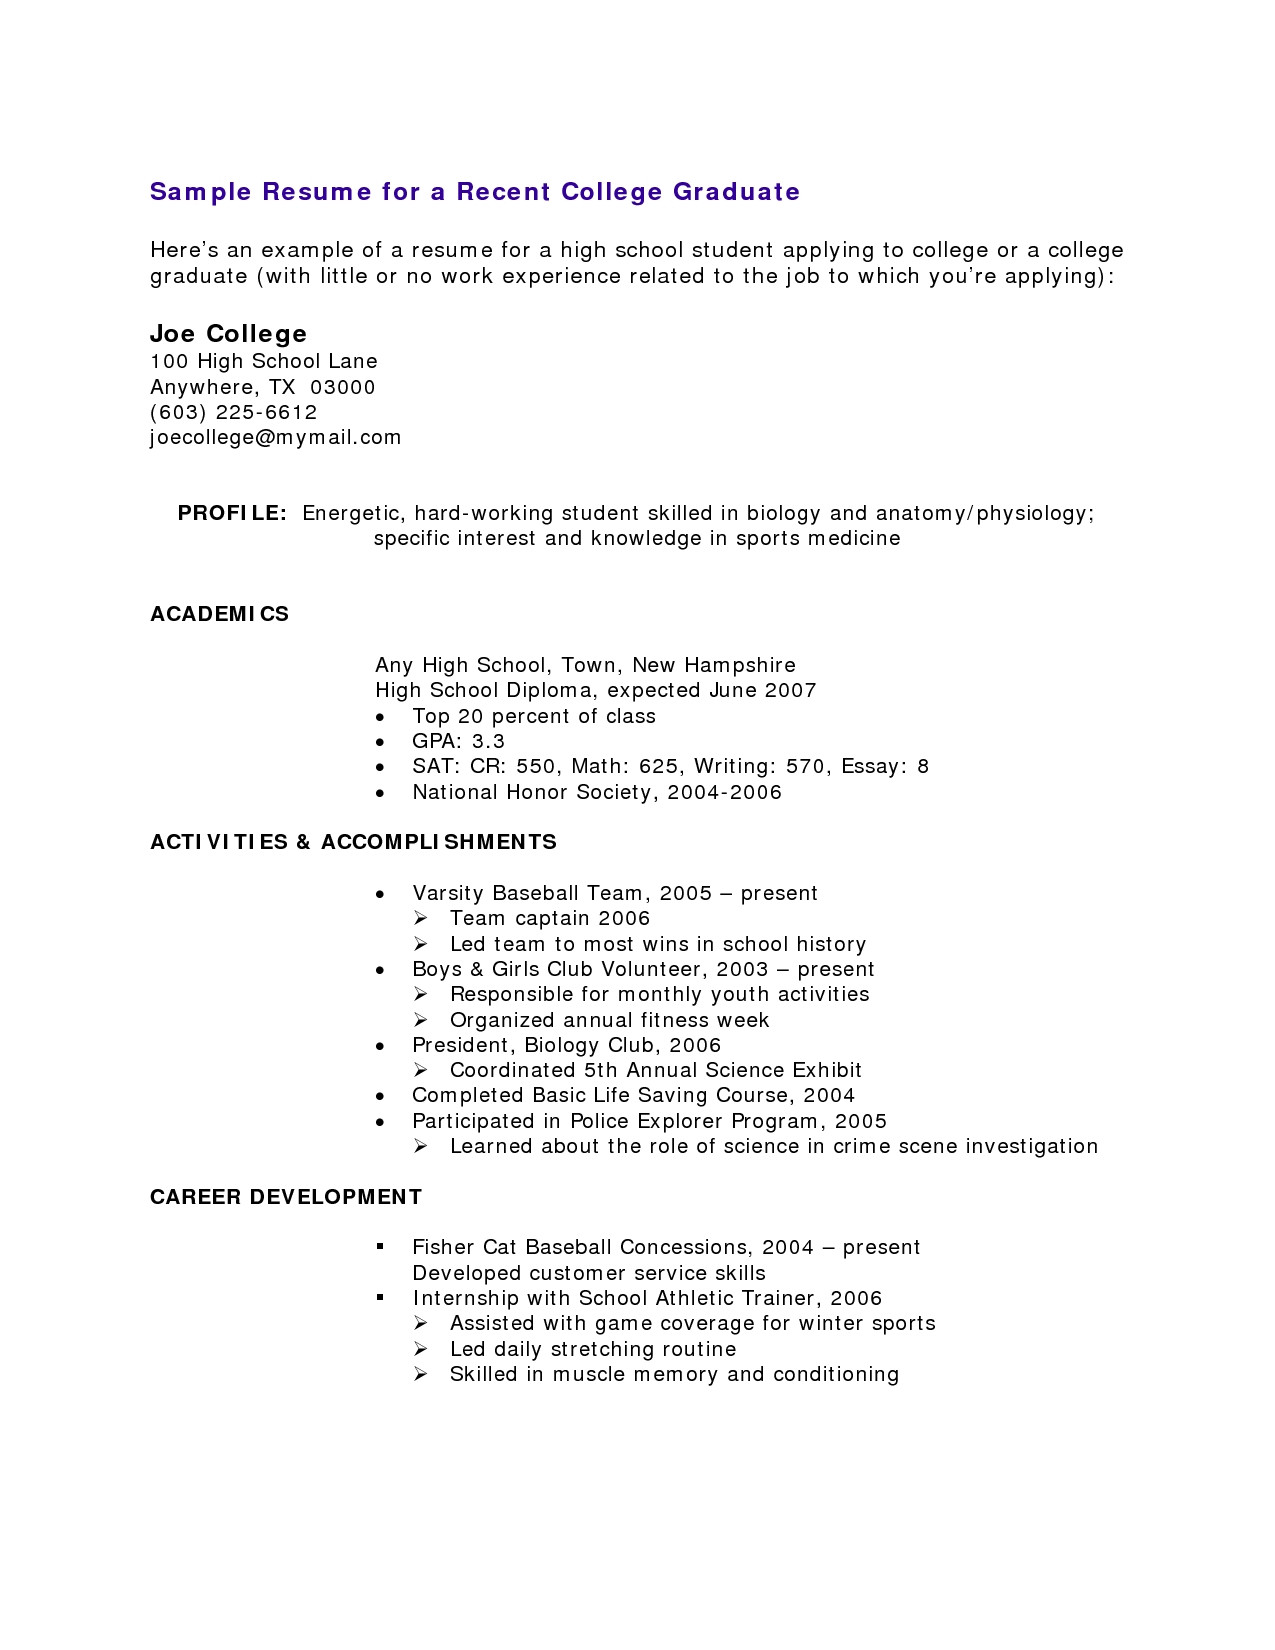 High School Graduate Resume Template No Experience How to Make A Resume for Job with No Experience – Easy Resume Sample